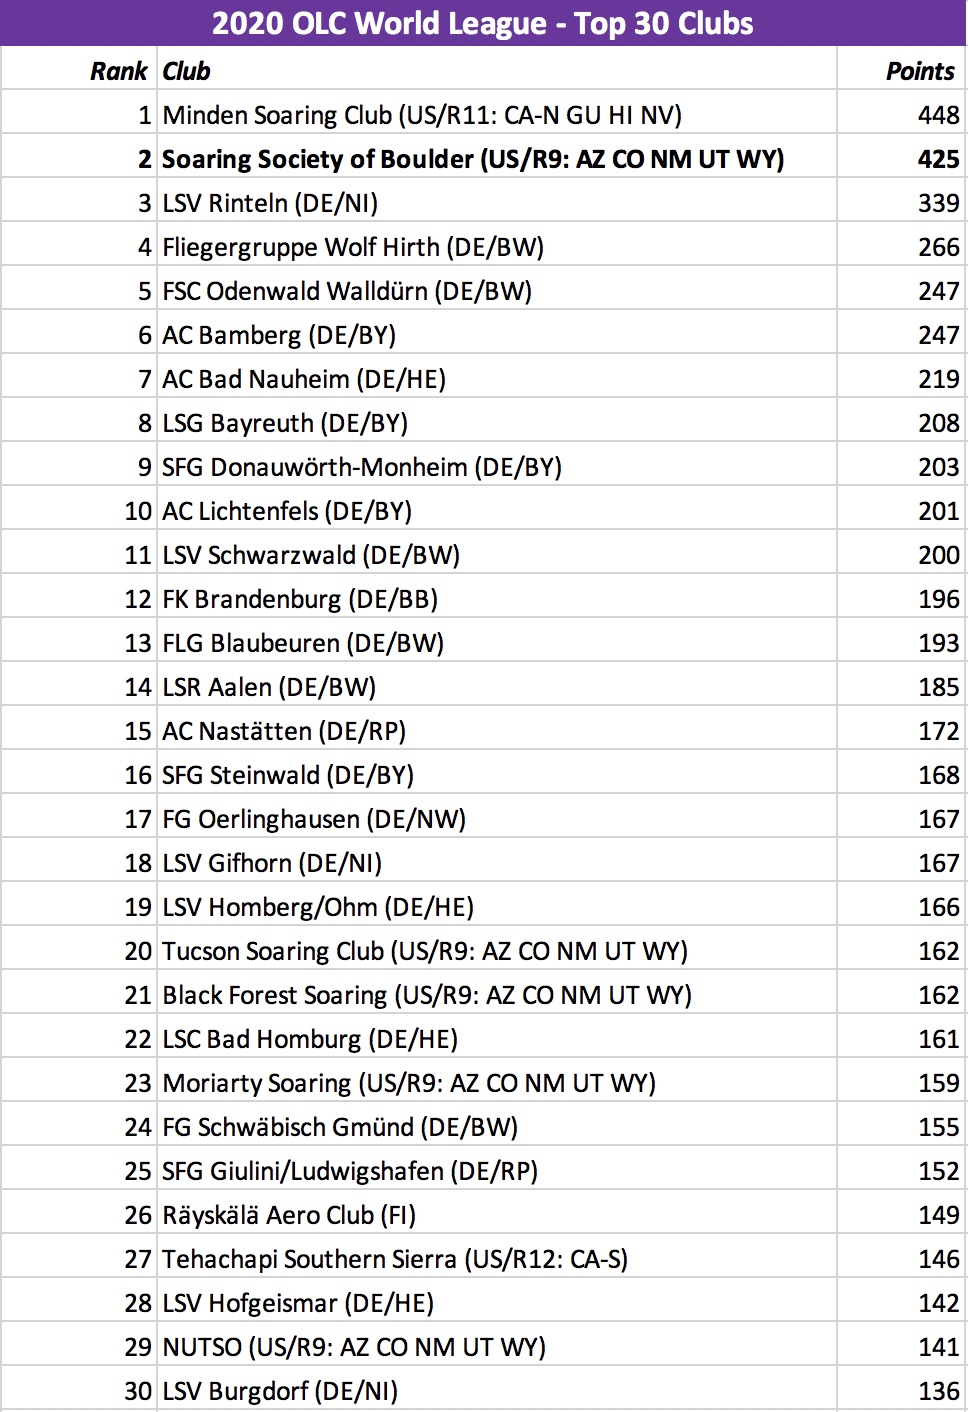 Top 20 Rankings with only 2020 points